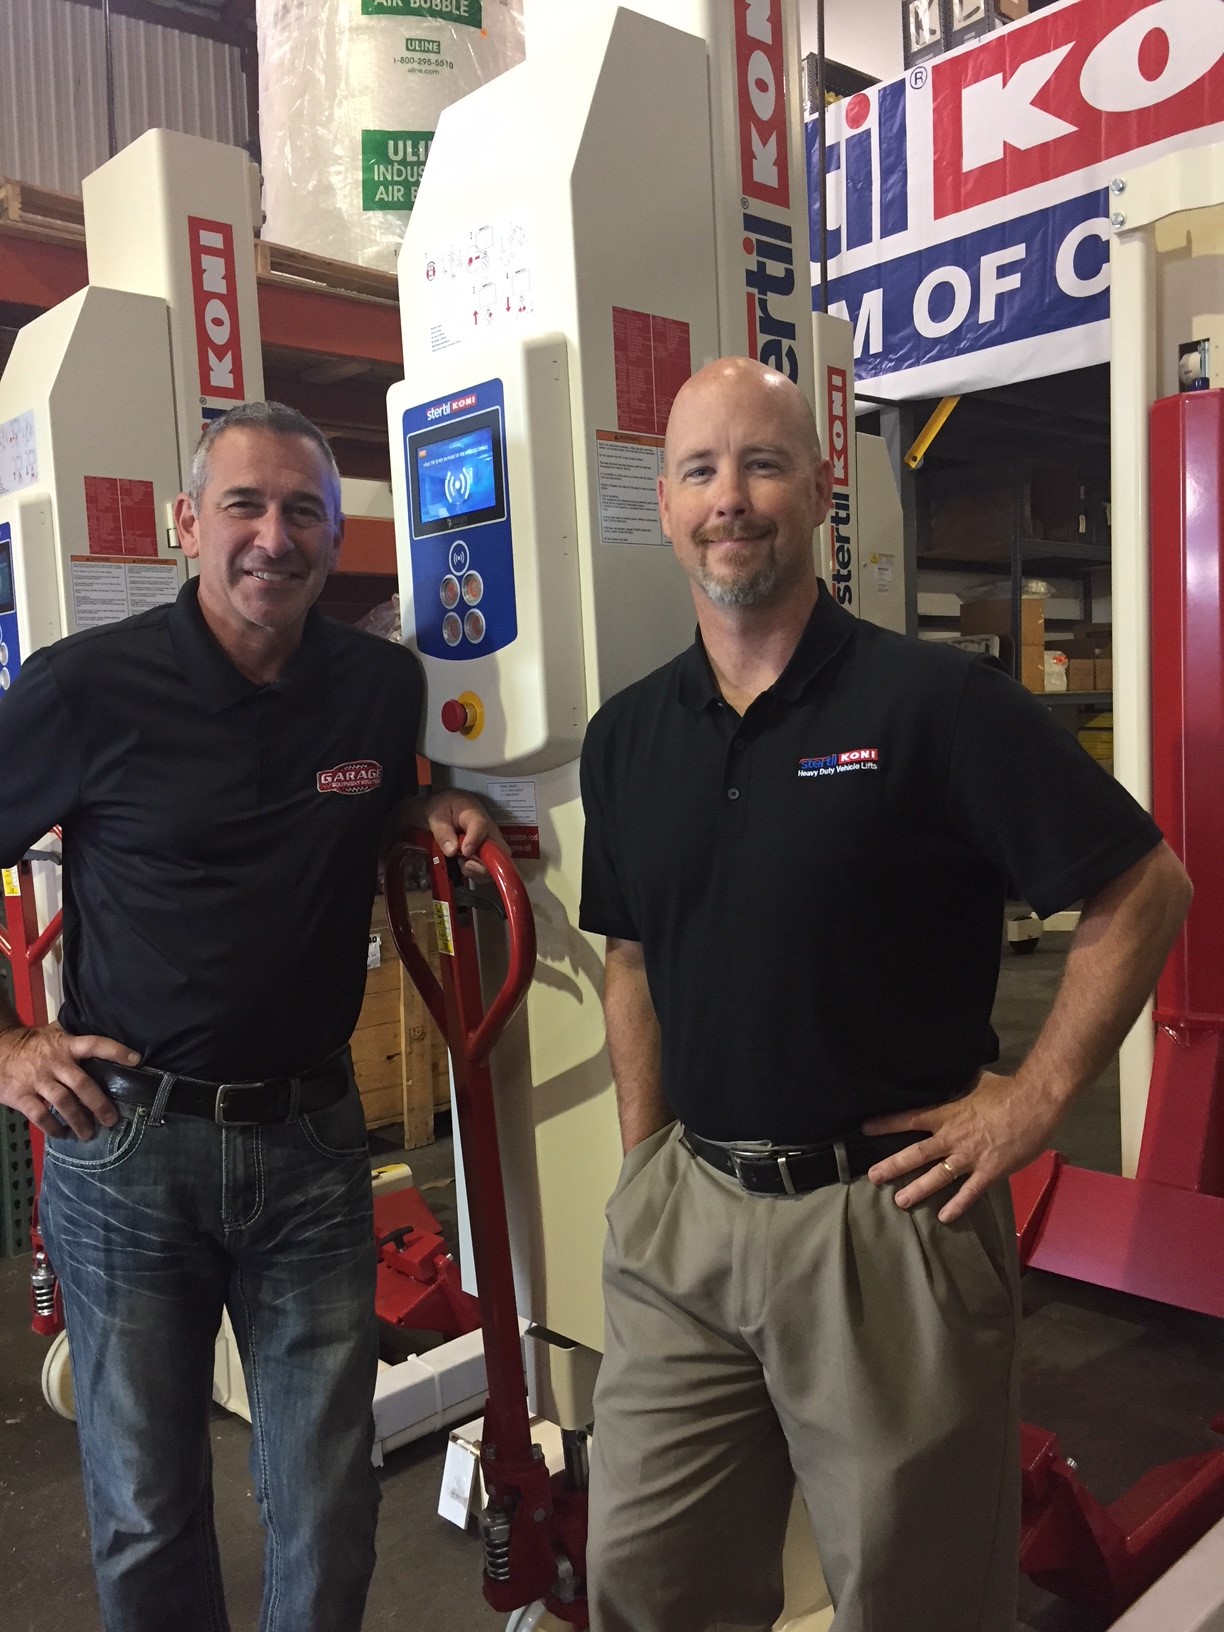 Top management at Stertil-Koni's newest distributor GES:  Owner Leon Fiacco (left) and Sales Manager Chris Holmes